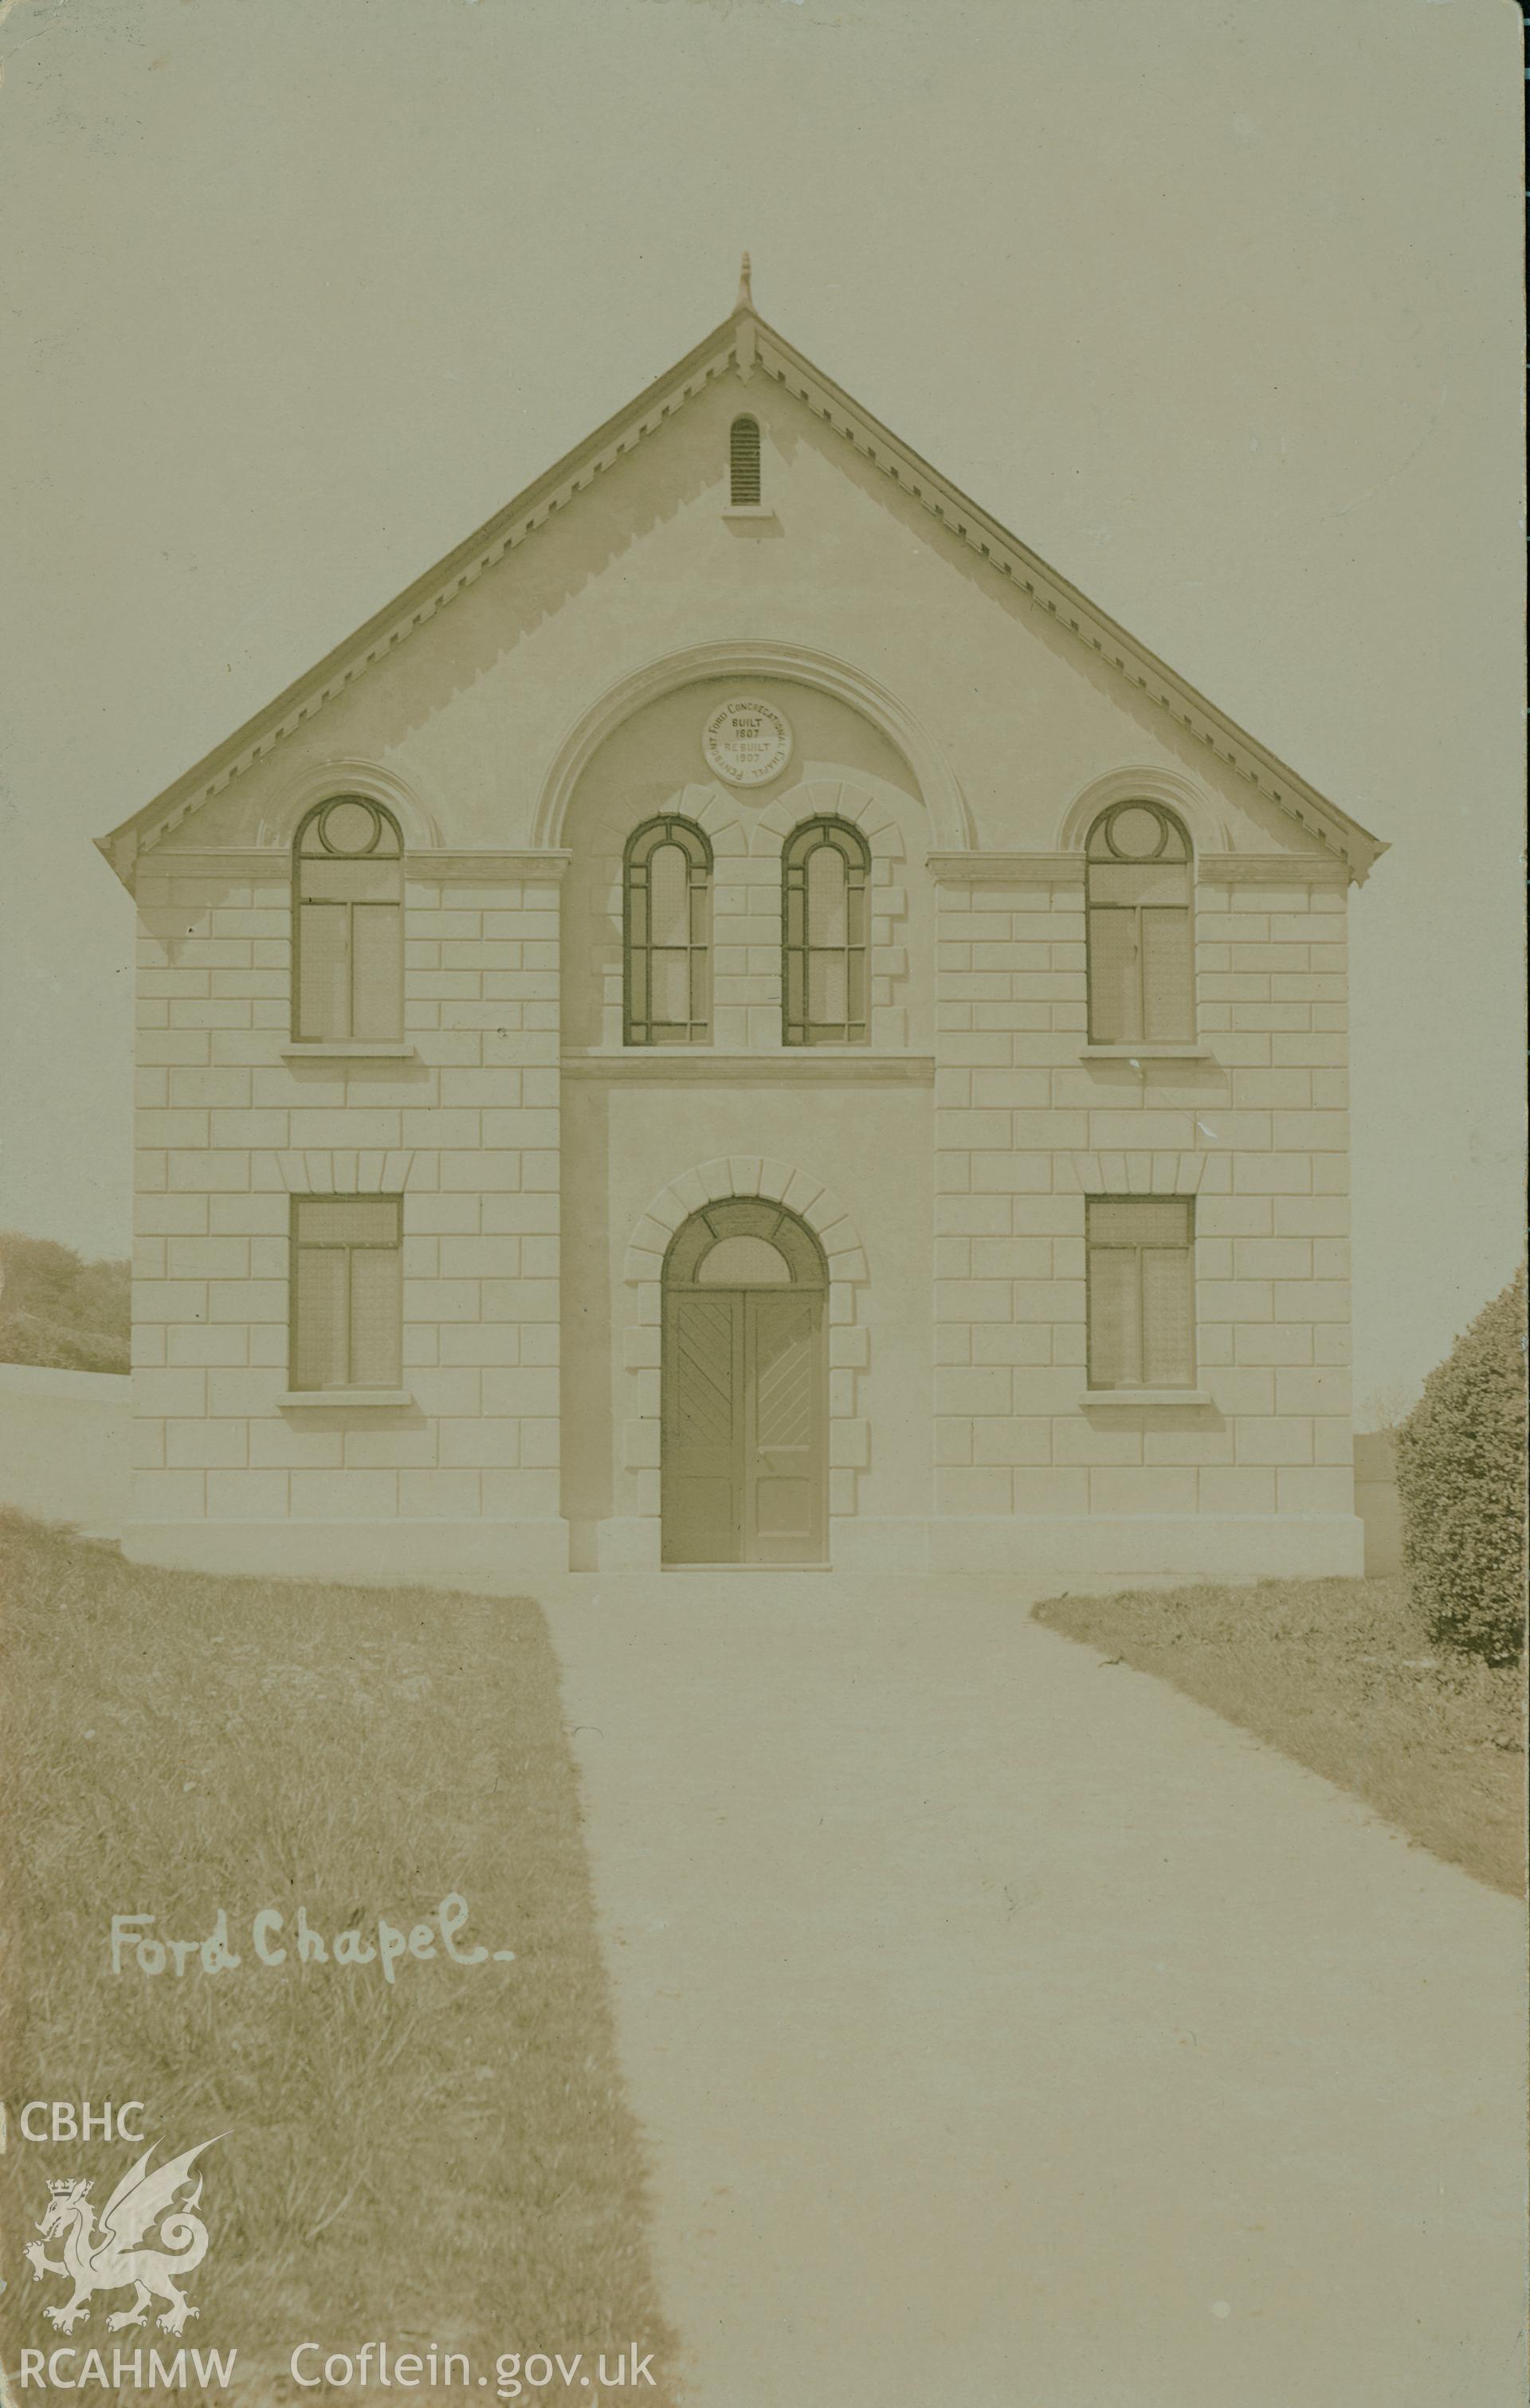 Digital copy of monochrome postcard showing exterior view of Penybont Welsh Independent chapel, Ford, Wolfscastle. Franked on 14th October 1911. Loaned for copying by Thomas Lloyd.